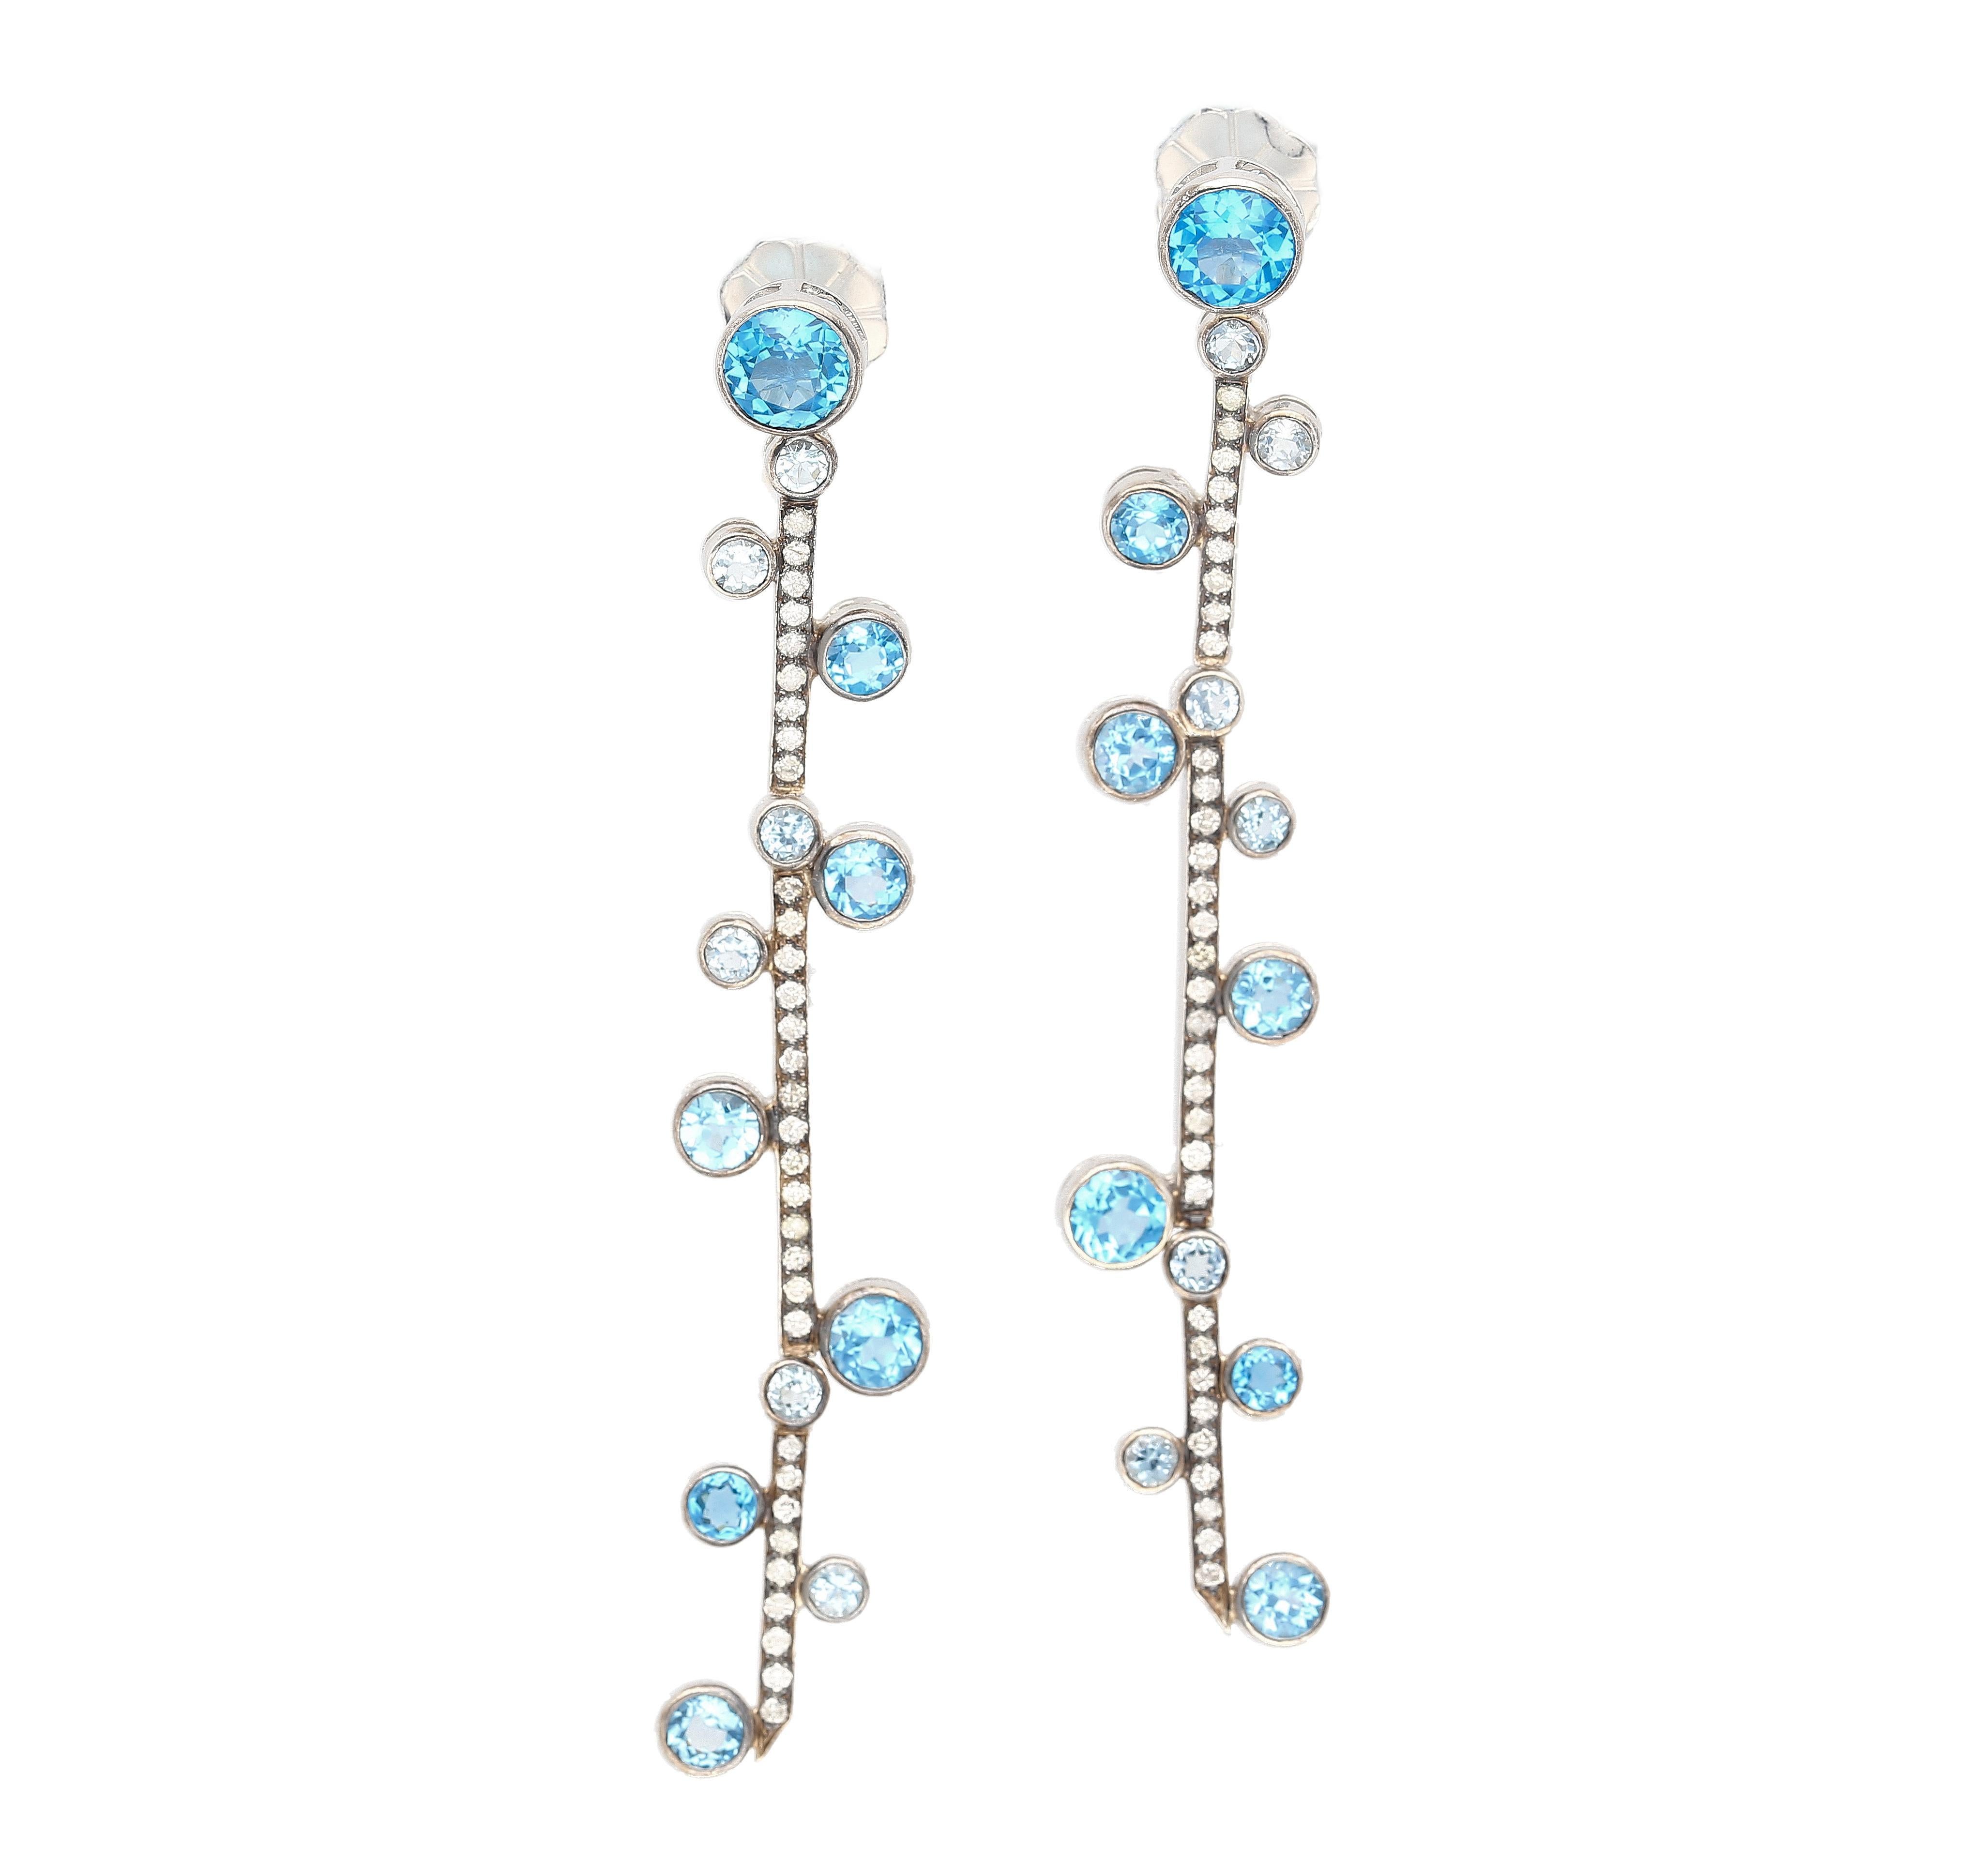 Natural Blue Topaz & Diamond Dangle Drop Earring in 18K White Gold. 

These dangle drop earrings feature 24 bezel-set natural blue Topaz gemstones, weighing 5.65 carats-total. The topaz is paired with additional round-cut diamond detailing, totaling